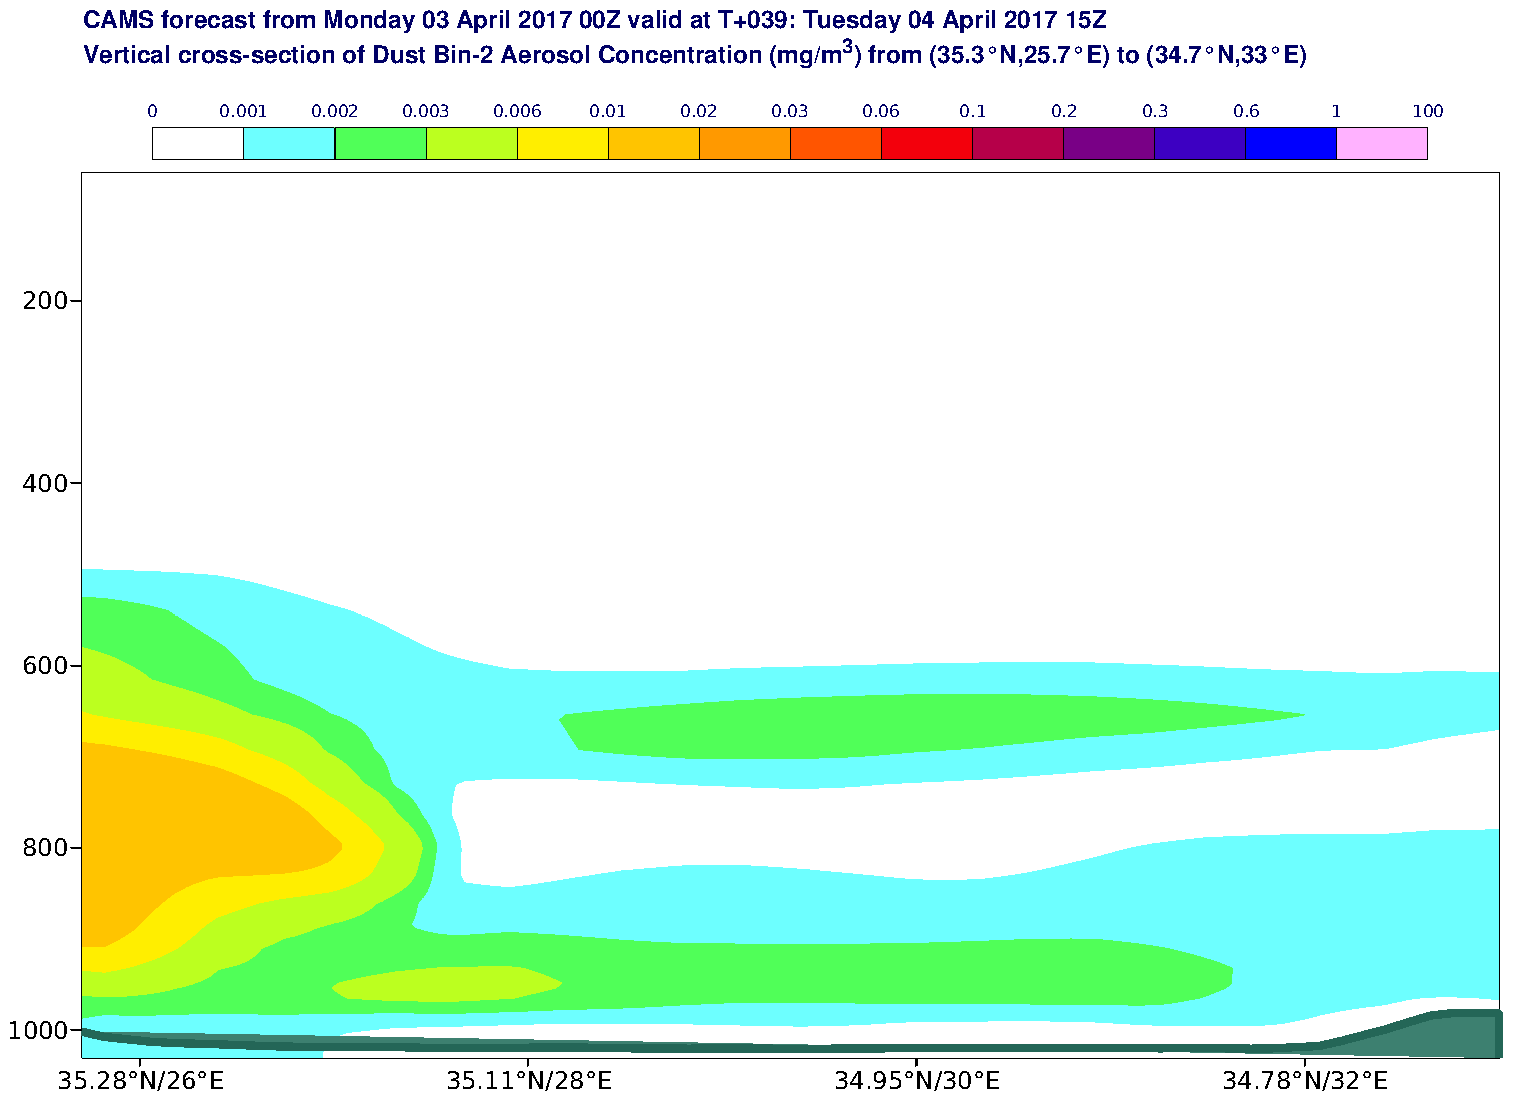 Vertical cross-section of Dust Bin-2 Aerosol Concentration (mg/m3) valid at T39 - 2017-04-04 15:00